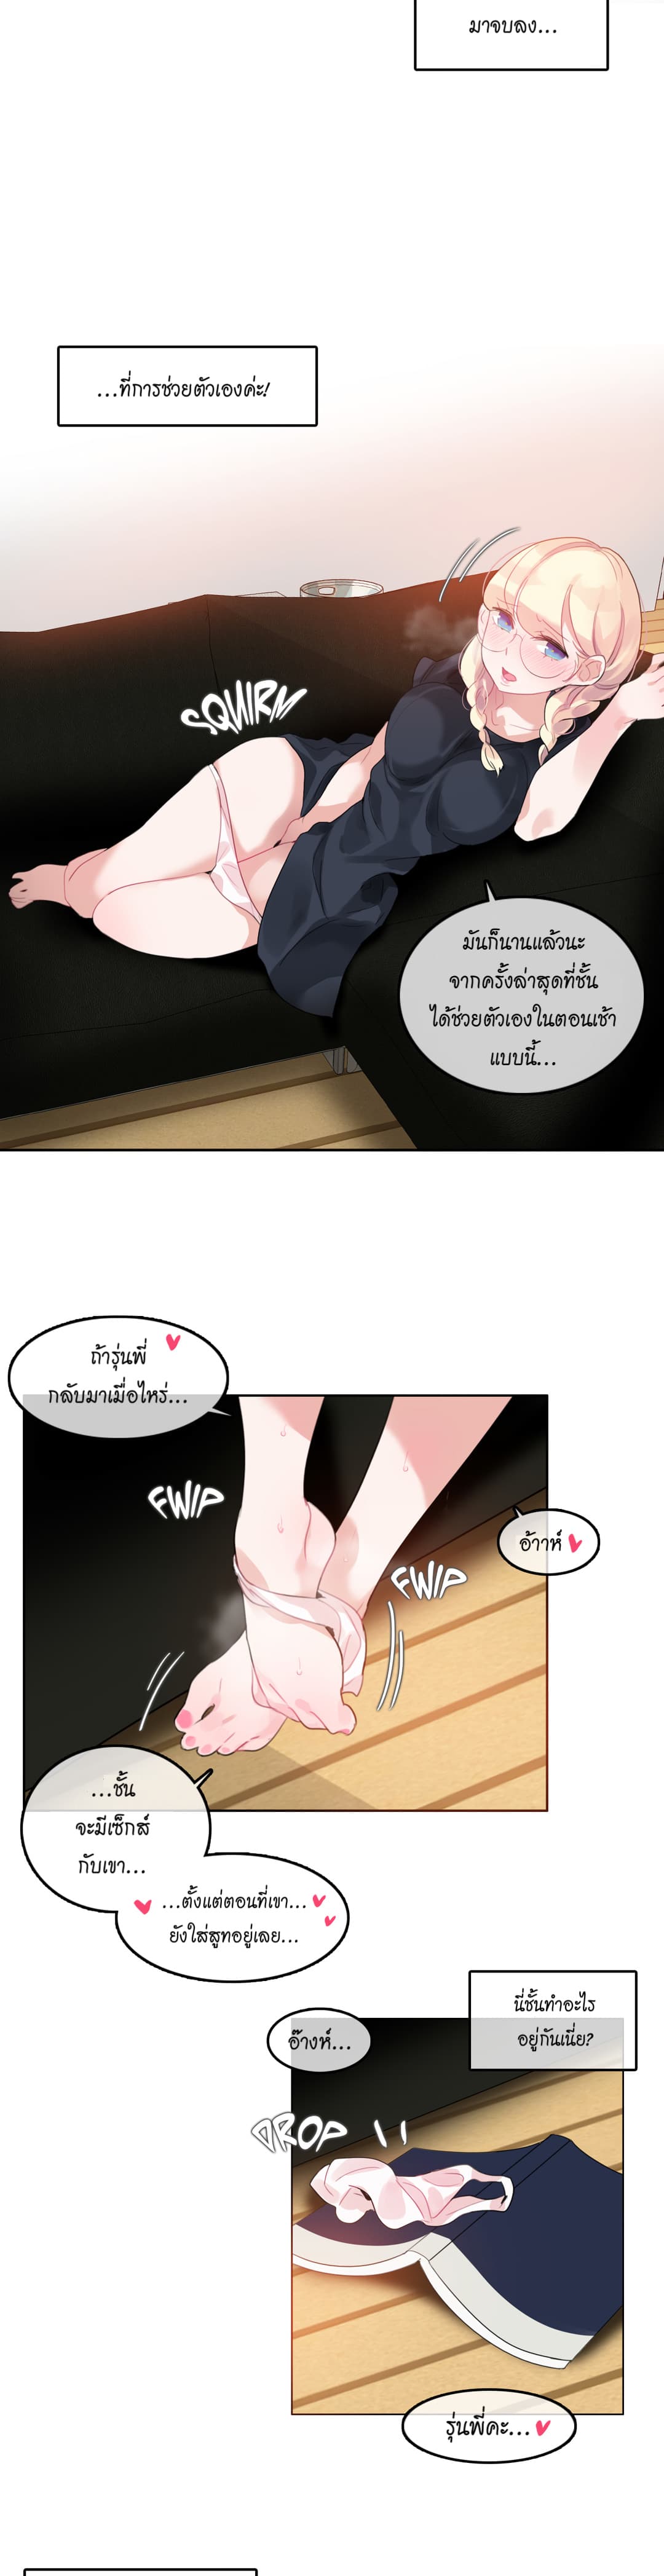 A Pervert’s Daily Life 42 (11)